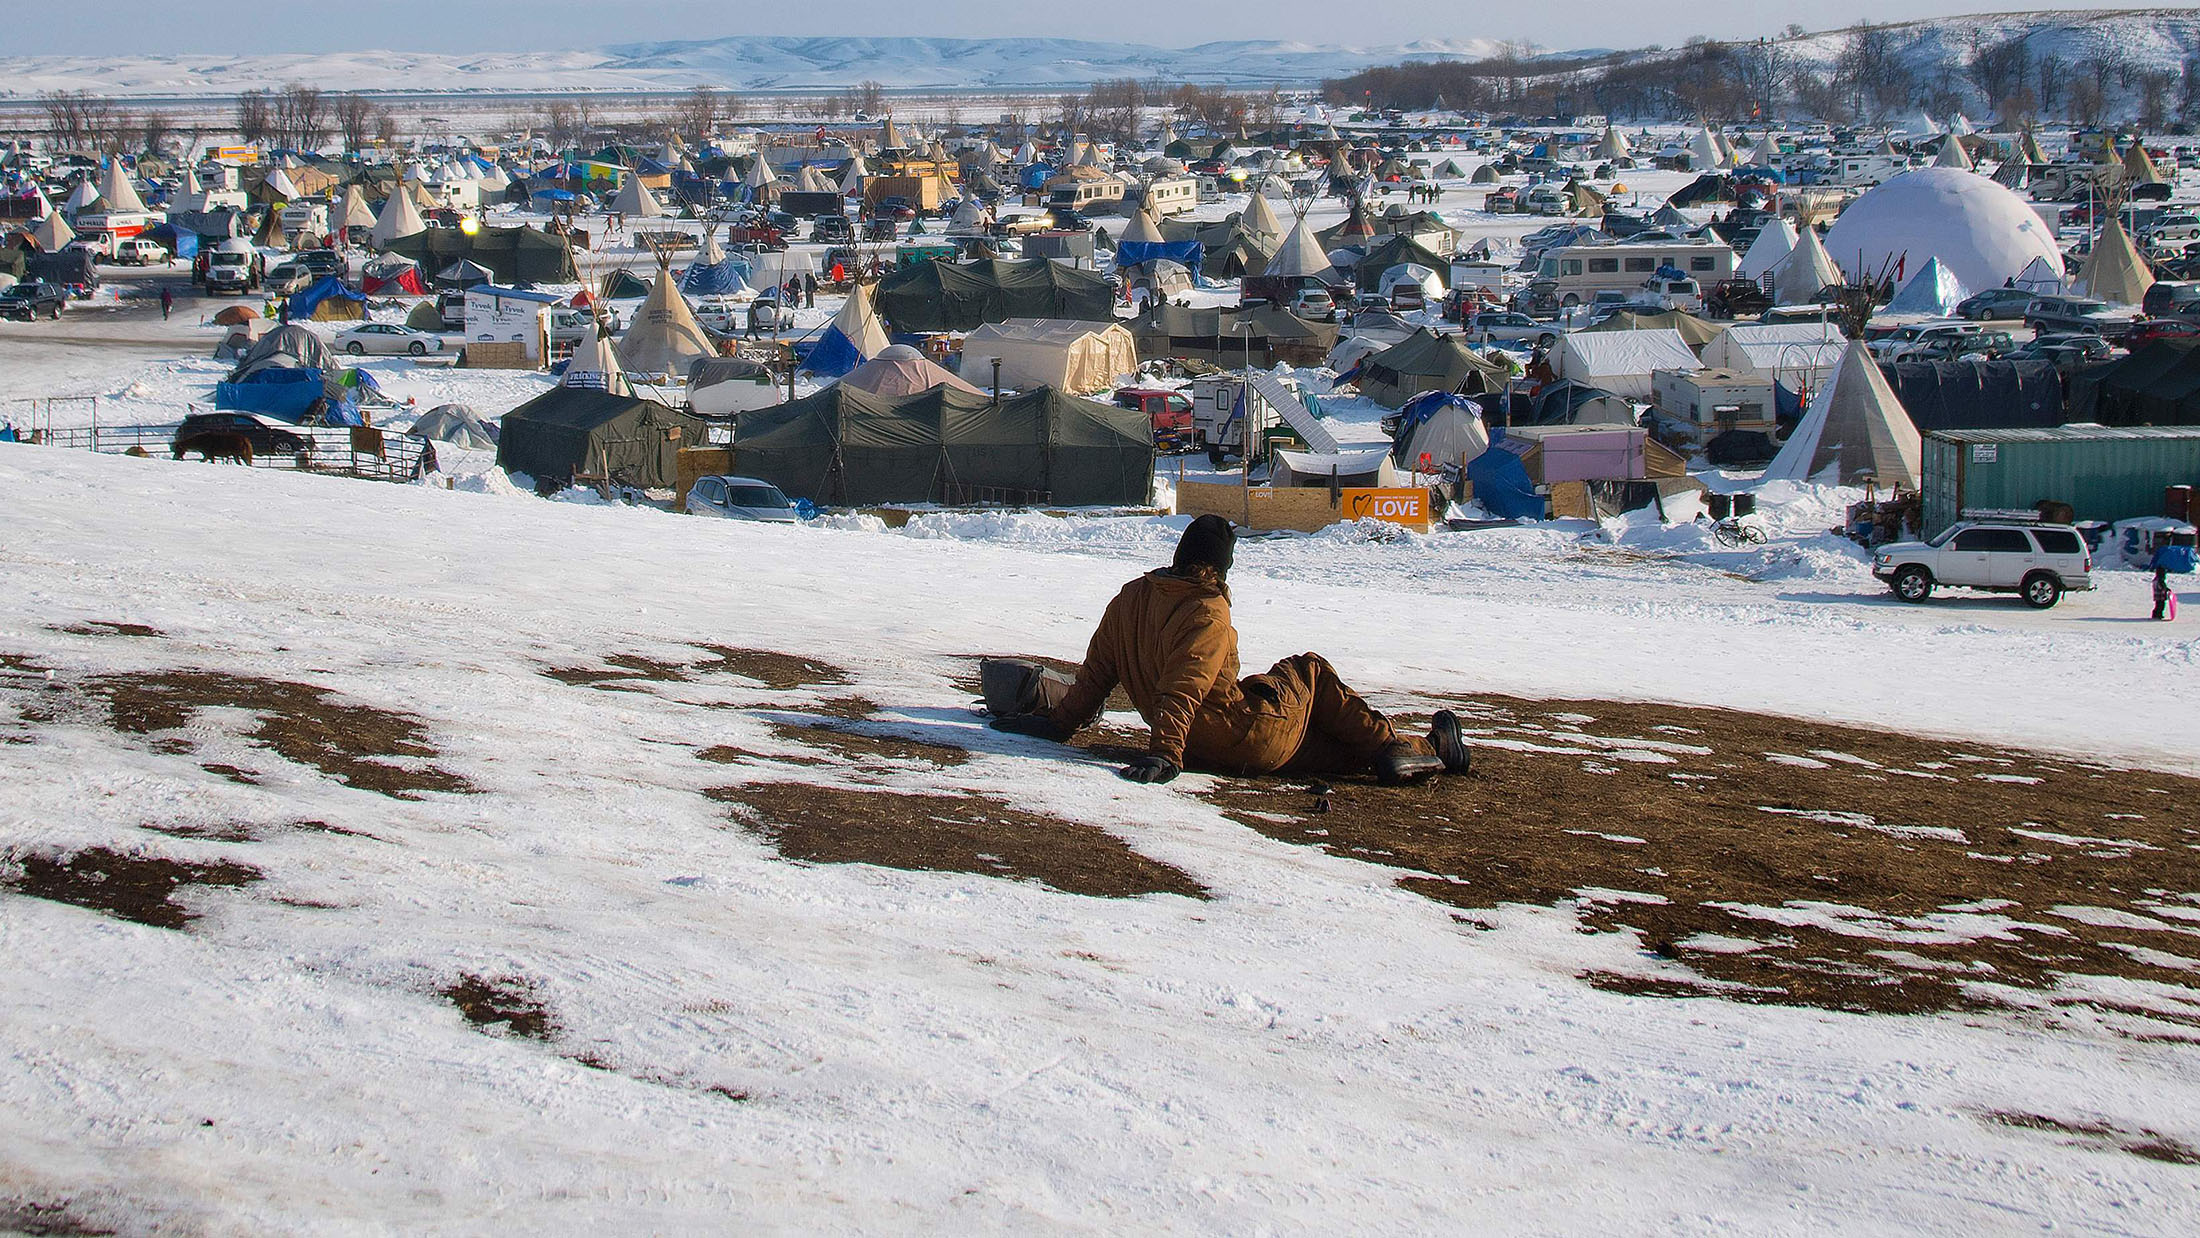 A man looks out over the Oceti Sakowin Camp on the edge of the Standing Rock Sioux Reservation on December 3, 2016 outside Cannon Ball, North Dakota, as Native Americans and activists from around the country gather at the camp trying to halt the construction of the Dakota Access Pipeline. / AFP / JIM WATSON (Photo credit should read JIM WATSON/AFP/Getty Images)
